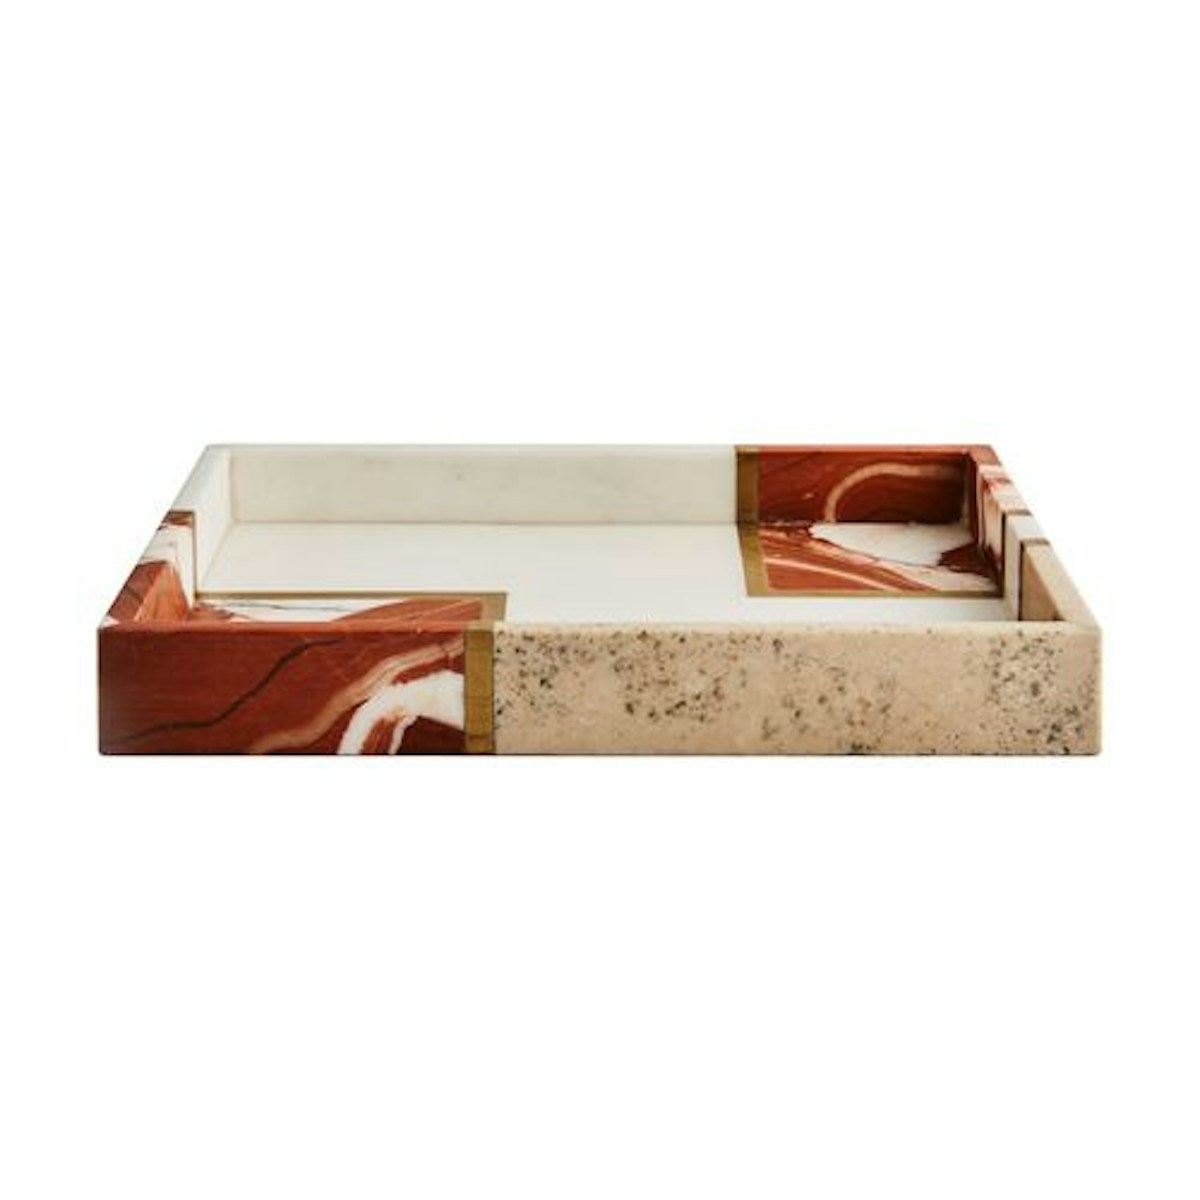 Diane Bianco & Rosso Marble Tray - 21 Best Decorative Trays To Buy For Your Tabletop - LuxDeco.com